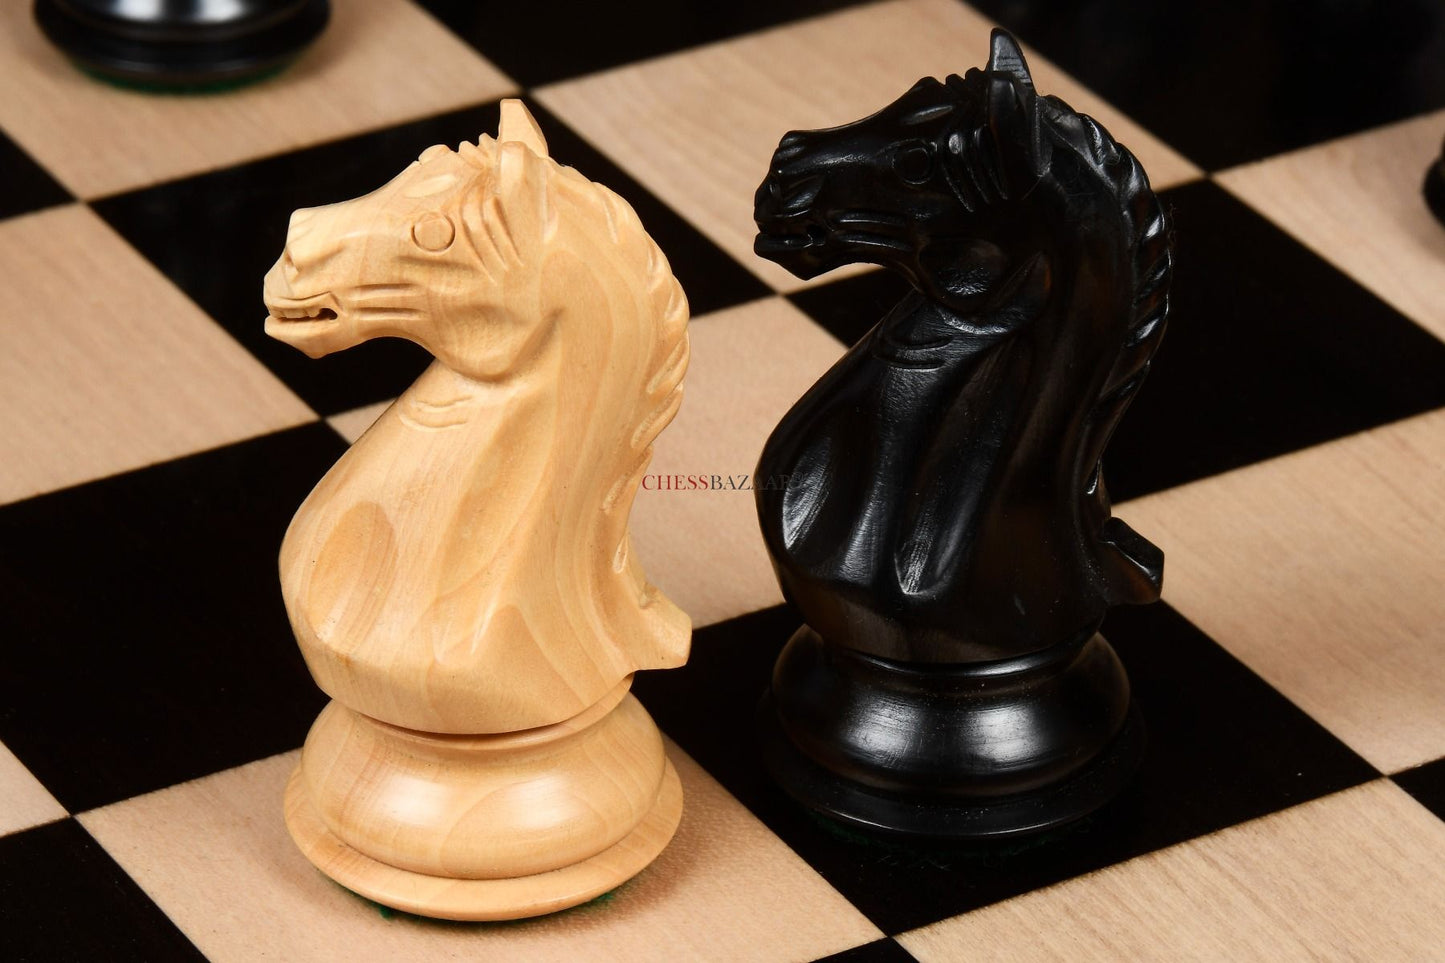 Combo of The Fierce Knight Staunton Wooden Chess Pieces in Ebonized Boxwood & Box Wood - 4.0" King with Storage Box and Wooden Chess Board - 21"